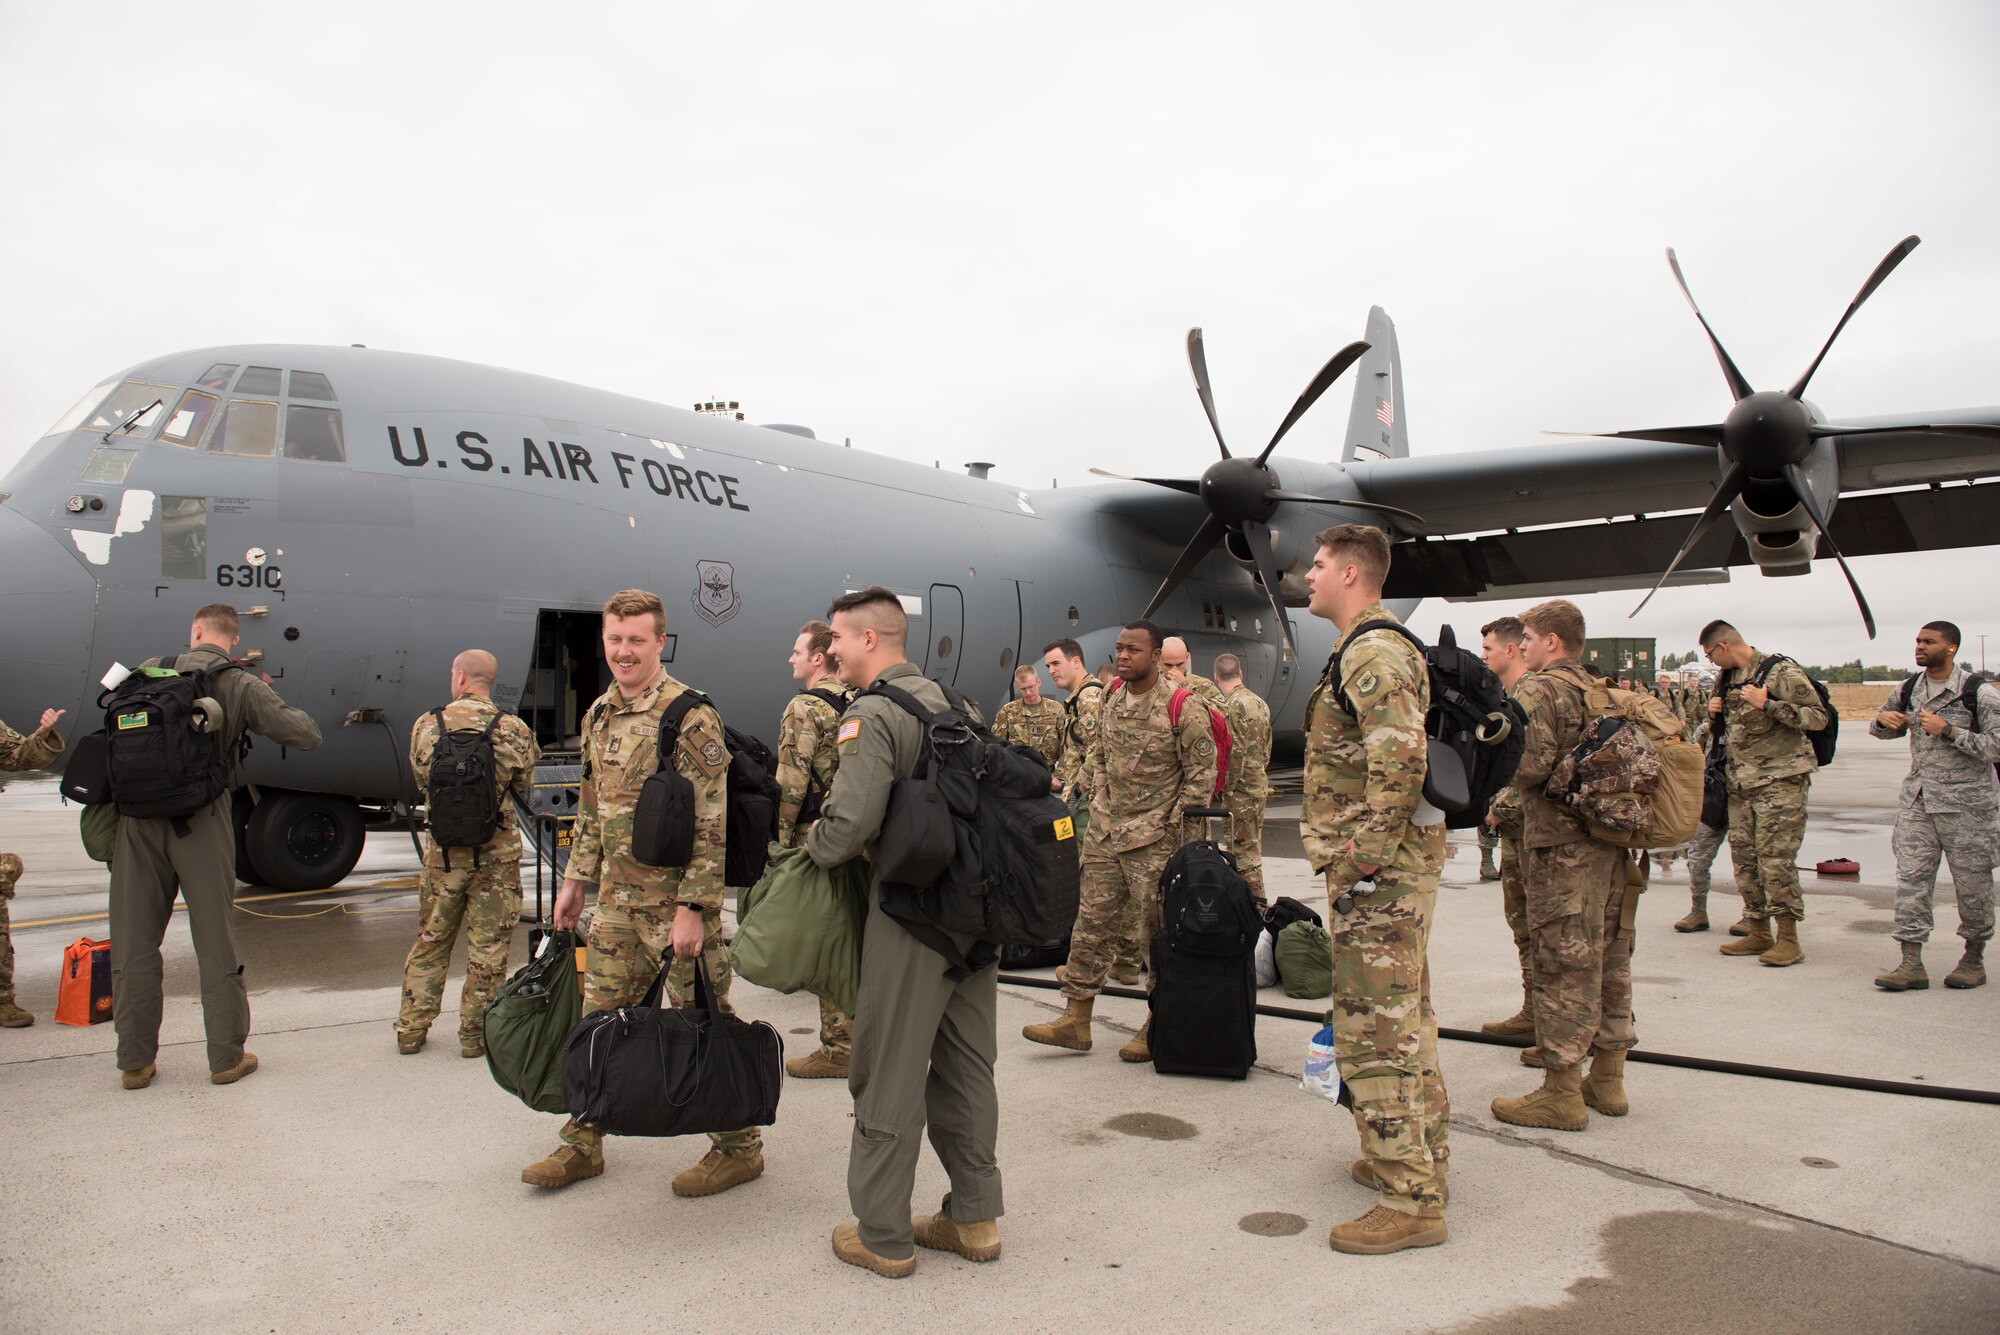 Airmen from Little Rock Air Force Base, Arkansas, disembark a C-130 Hercules for Air Mobility Command’s Mobility Guardian 2019 exercise at Fairchild Air Force Base, Washington, Sept. 8, 2019. Exercise Mobility Guardian is AMC’s premier, large-scale mobility exercise designed to build joint leaders and strengthen international partnerships and interoperability. (U.S. Air Force photo by Senior Airman Ryan Lackey)